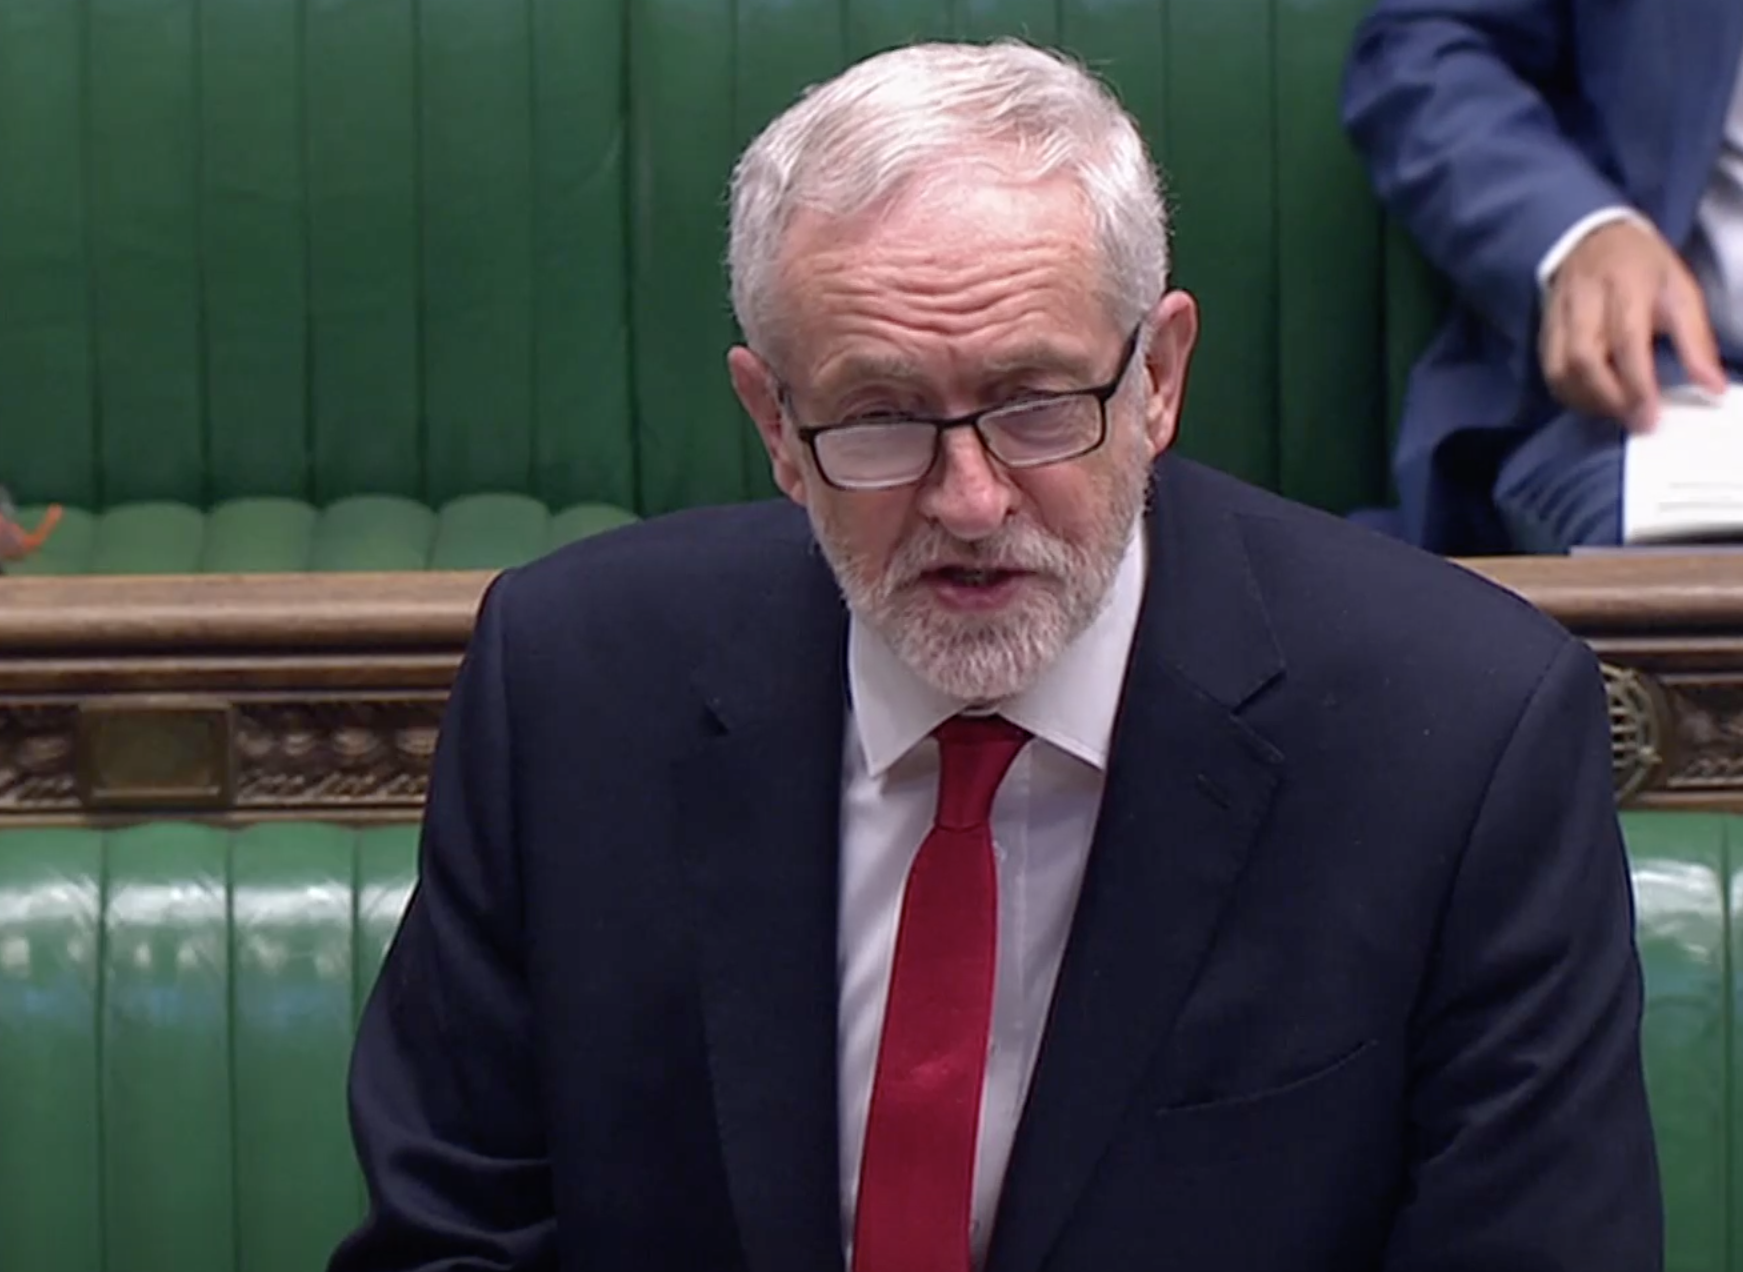 Jeremy Corbyn said he would ‘not [disappear] from anywhere’ at Prime Minister's Questions on 25 March 2020